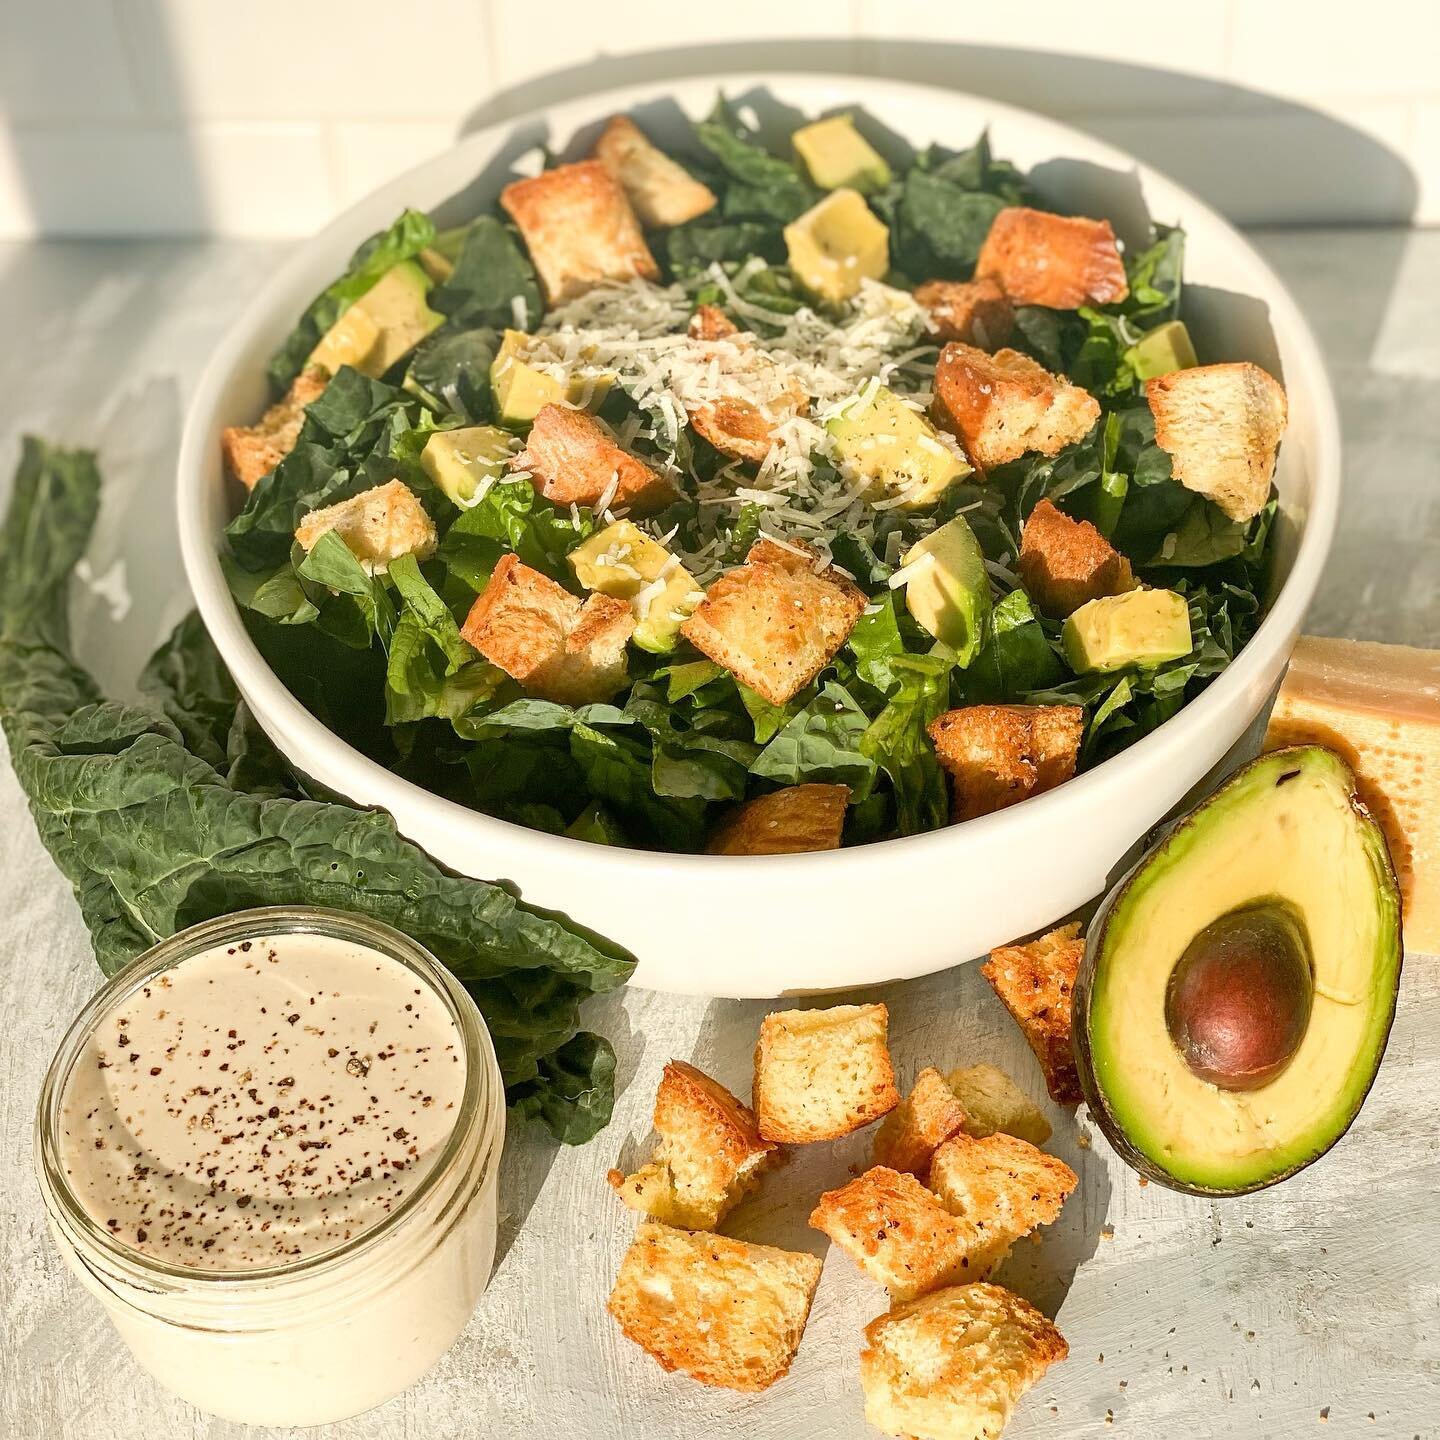 This Kale Avocado Caesar Salad with Homemade Caesar Dressing instantly transports you to Southern California! ☀️🥑 The Homemade Caesar dressing is accompanied by warm, homemade croutons, a ripe hass avocado, and freshly grated Parmigiano-Reggiano to 